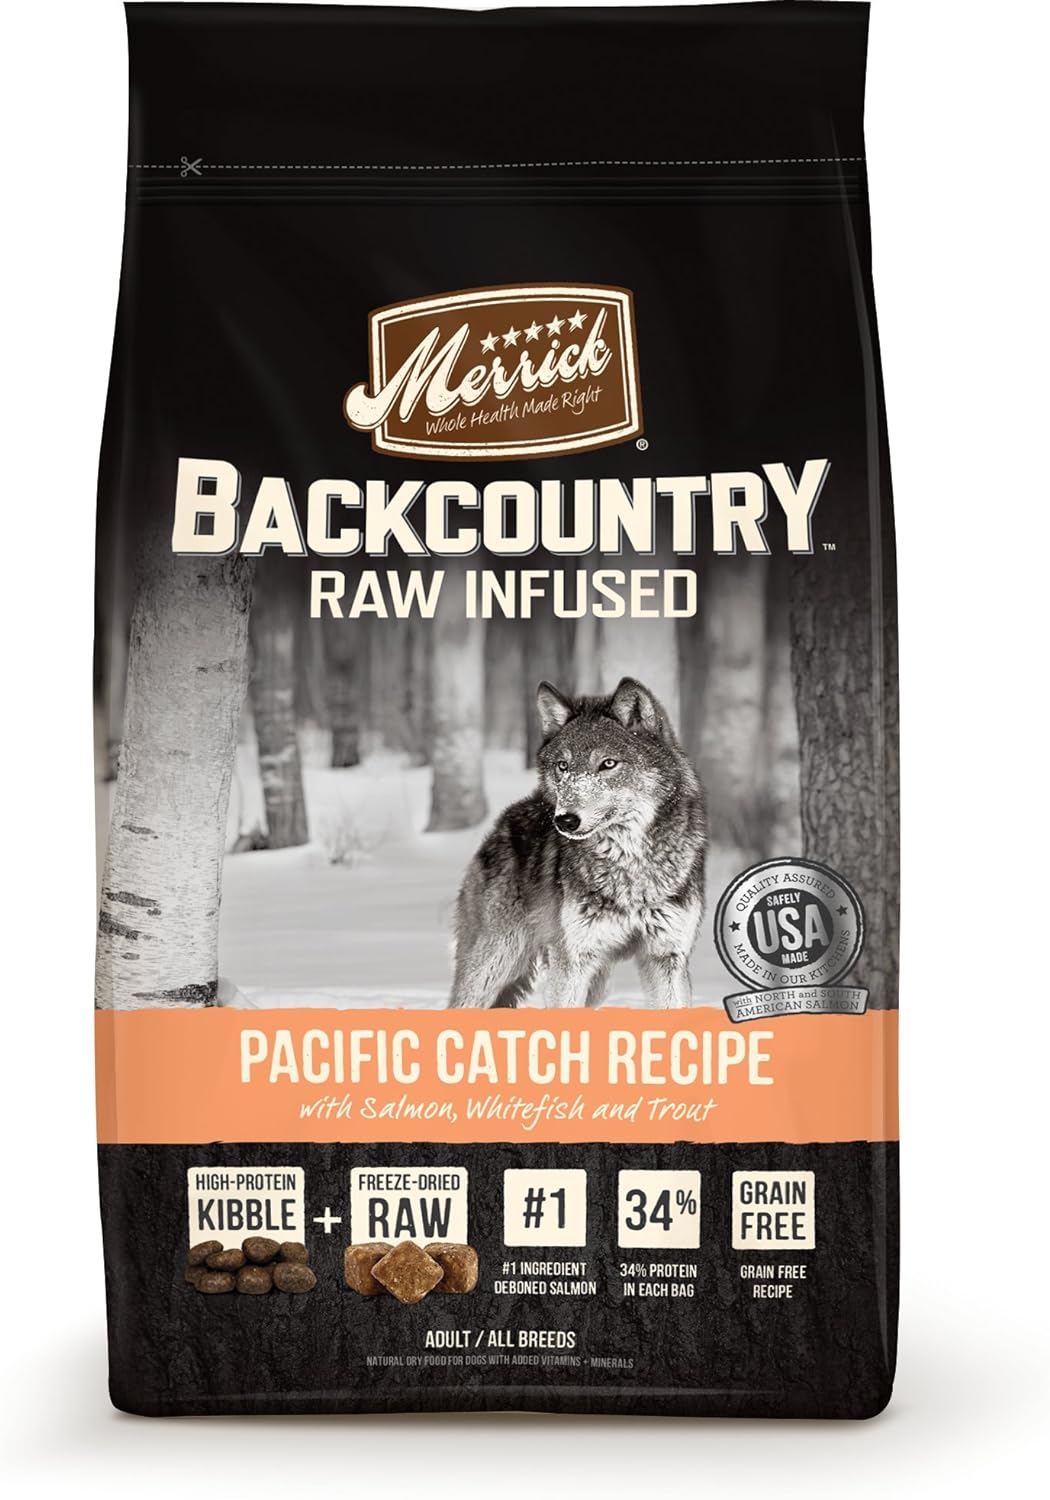 Merrick Backcountry Raw Infused Pacific Catch Recipe Dry Dog Food – Gallery Image 1